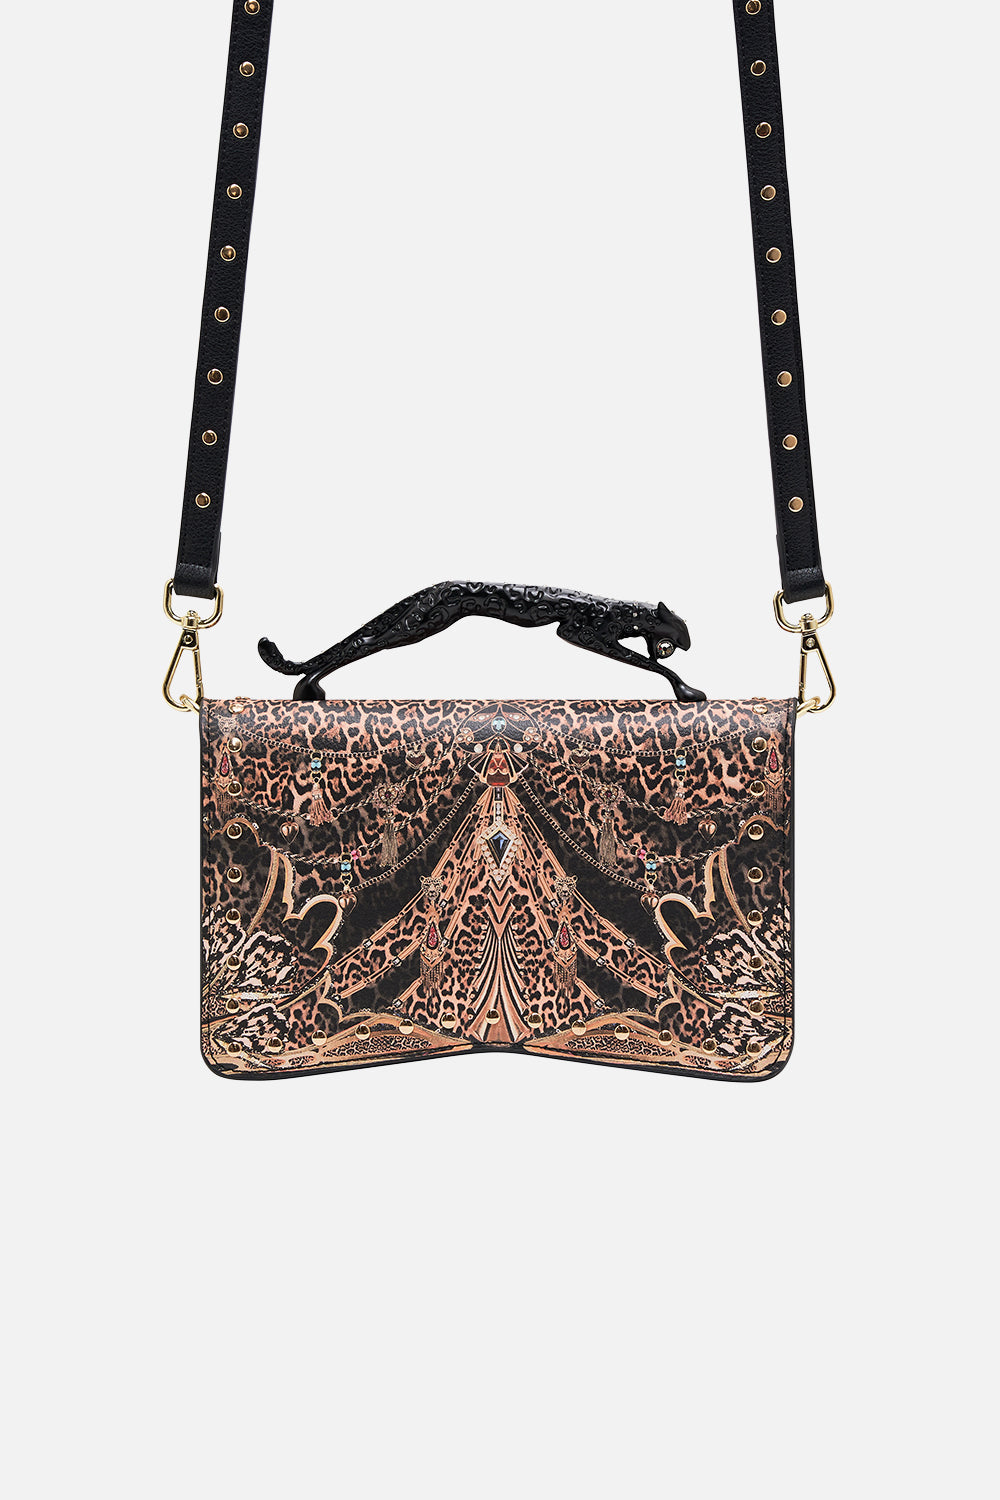 CAMILLA leopard east west bag with leopard handle in Amsterglam